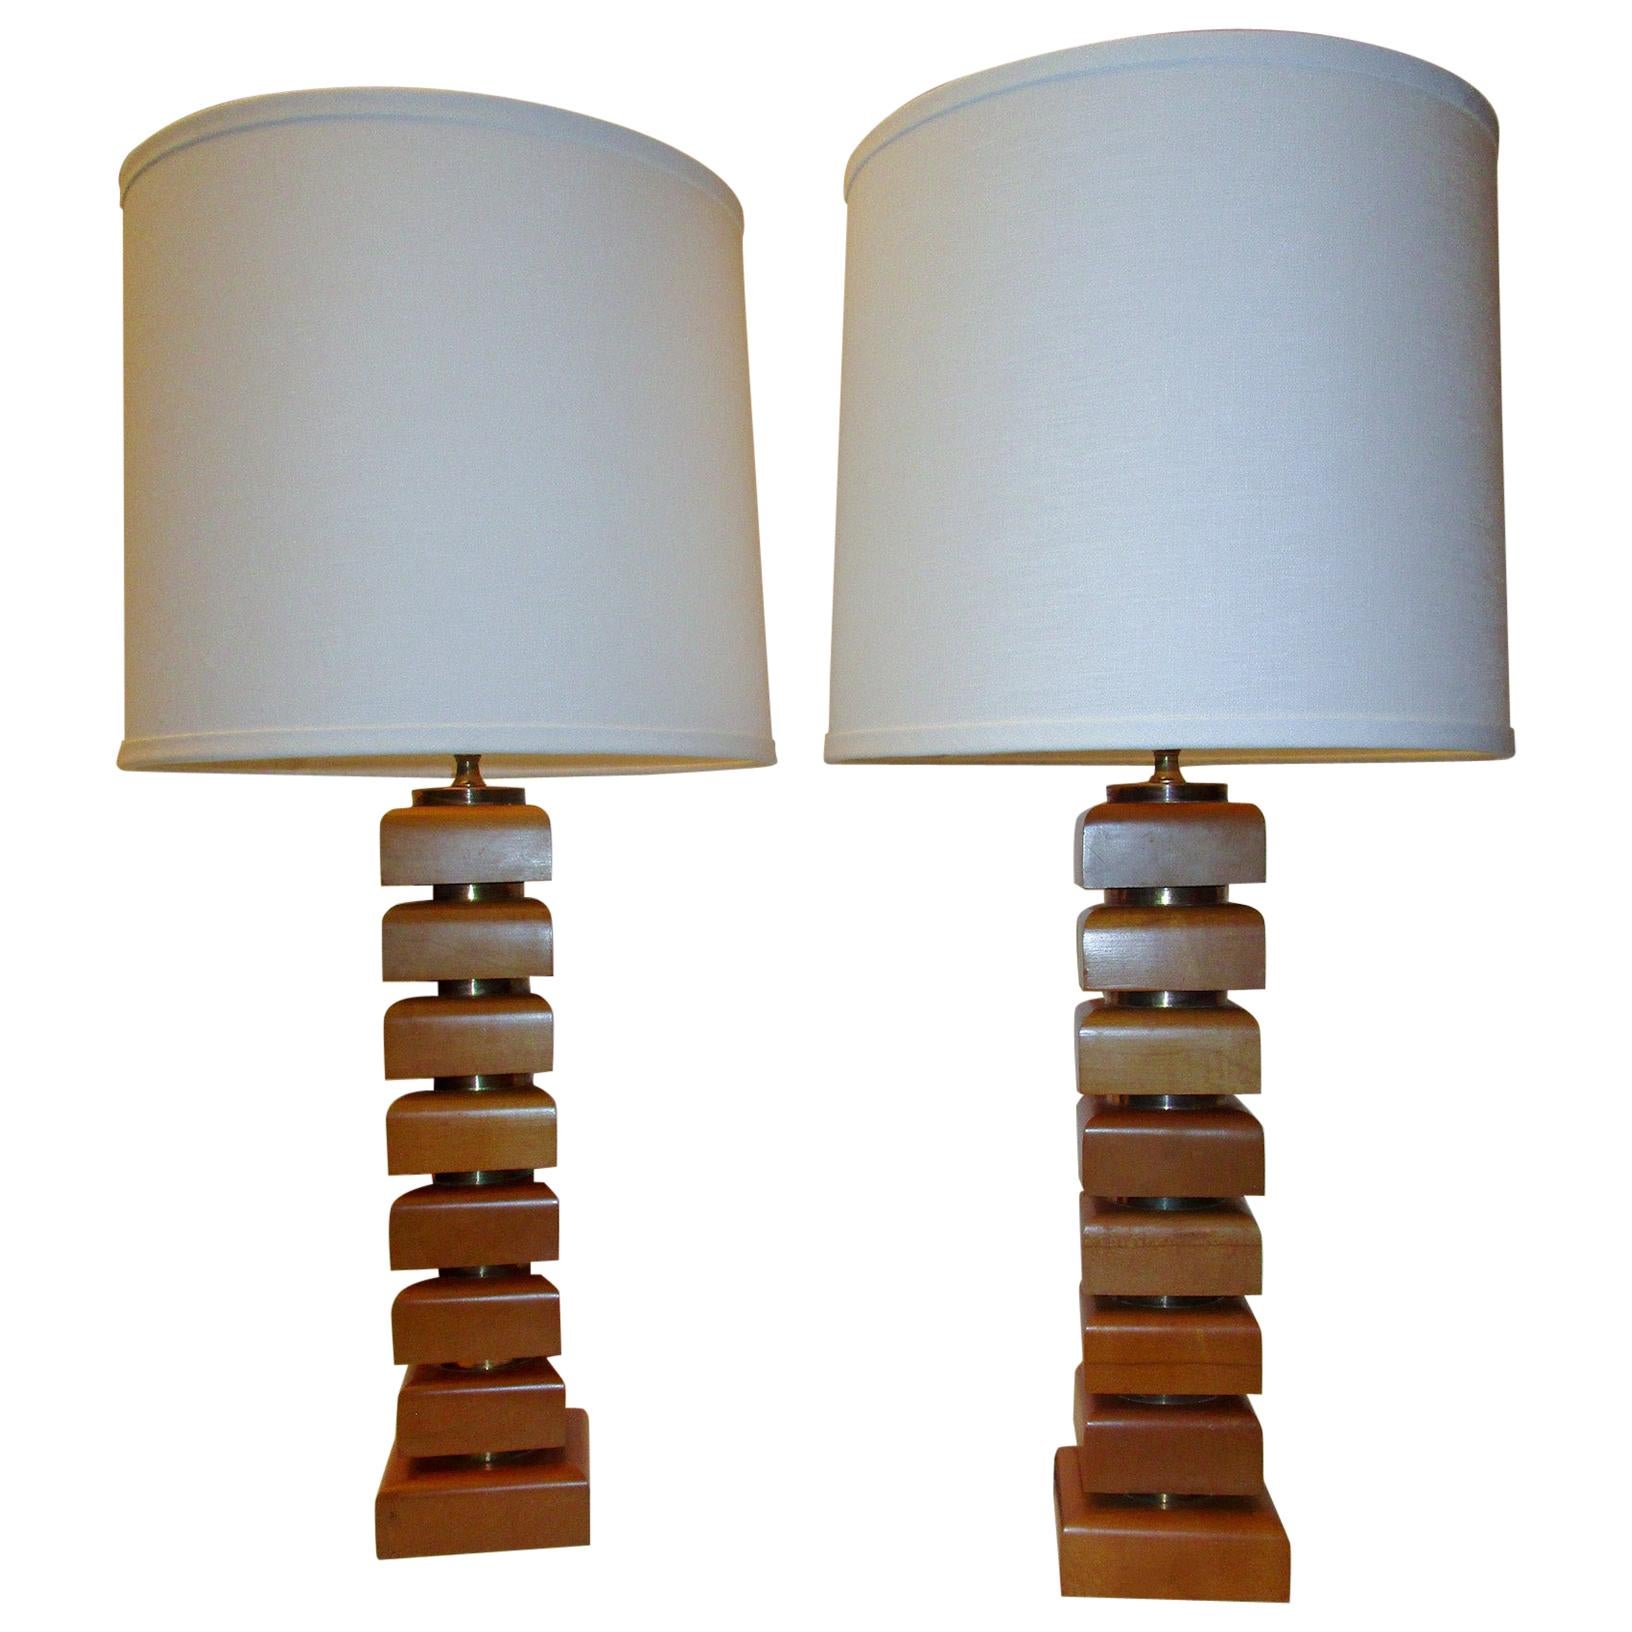 Pair of Mid-Century Modern Maple and Brass Table Lamps